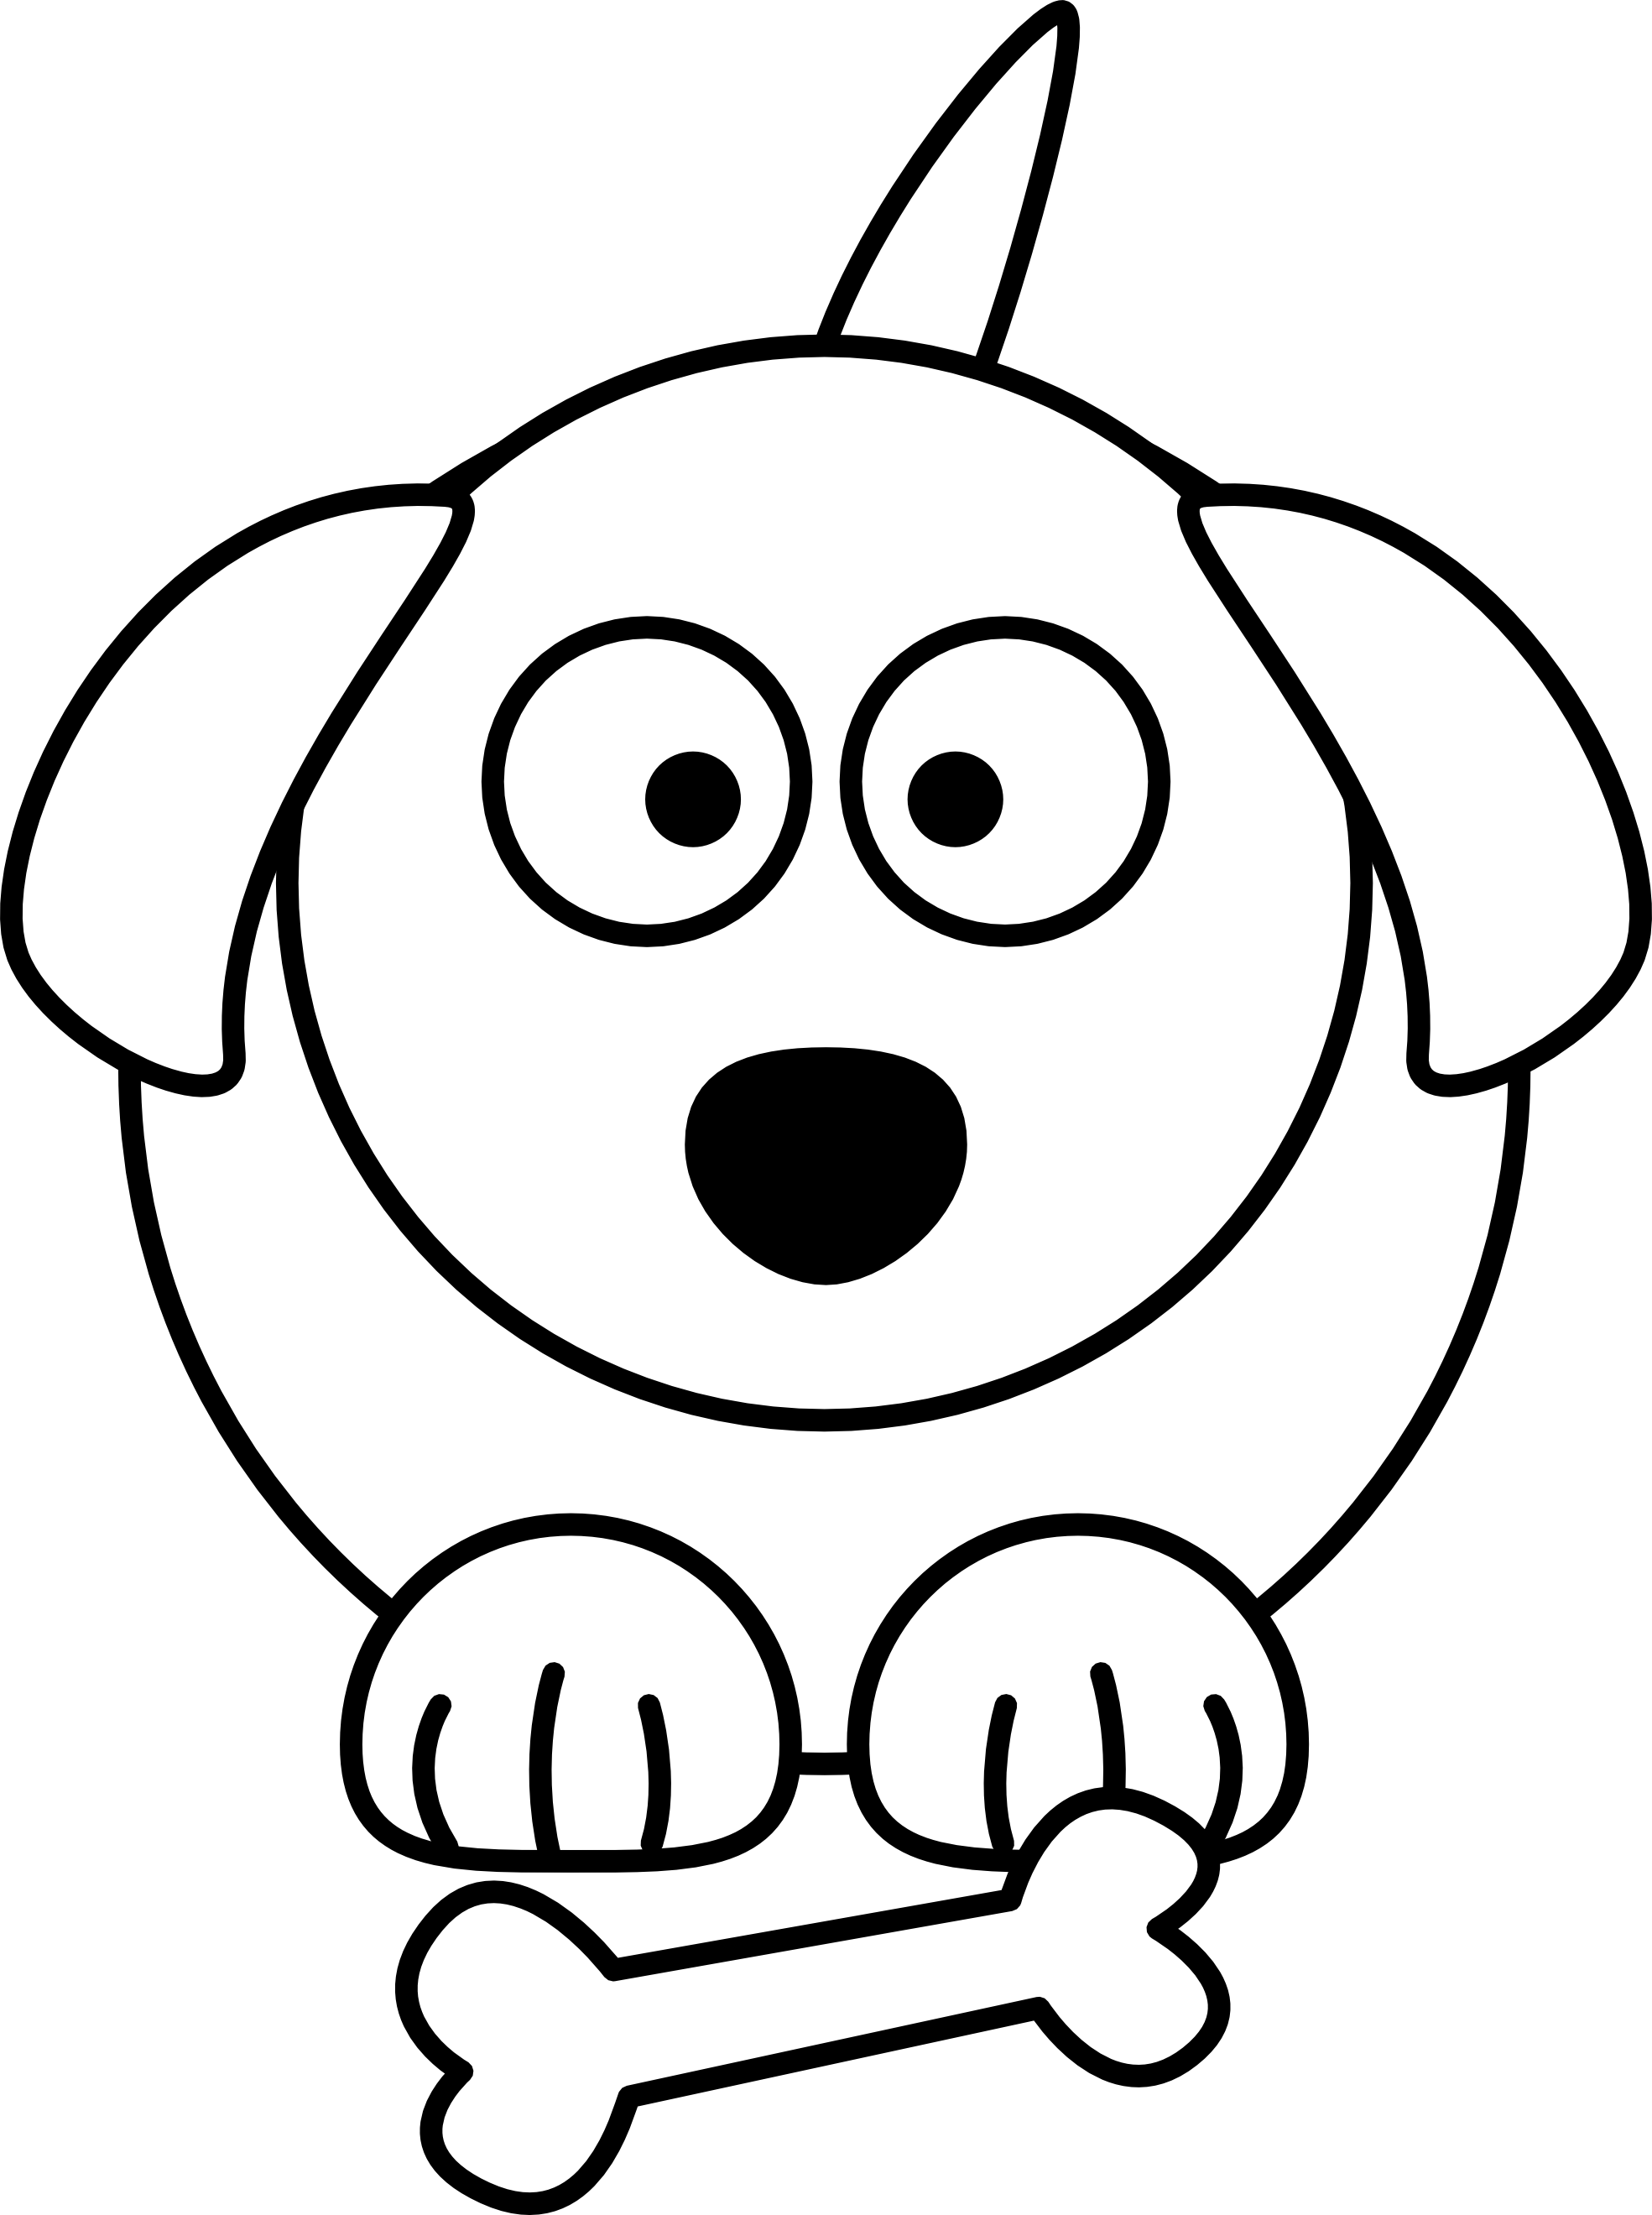 Drawings Of Cartoon Dogs - Clipart library